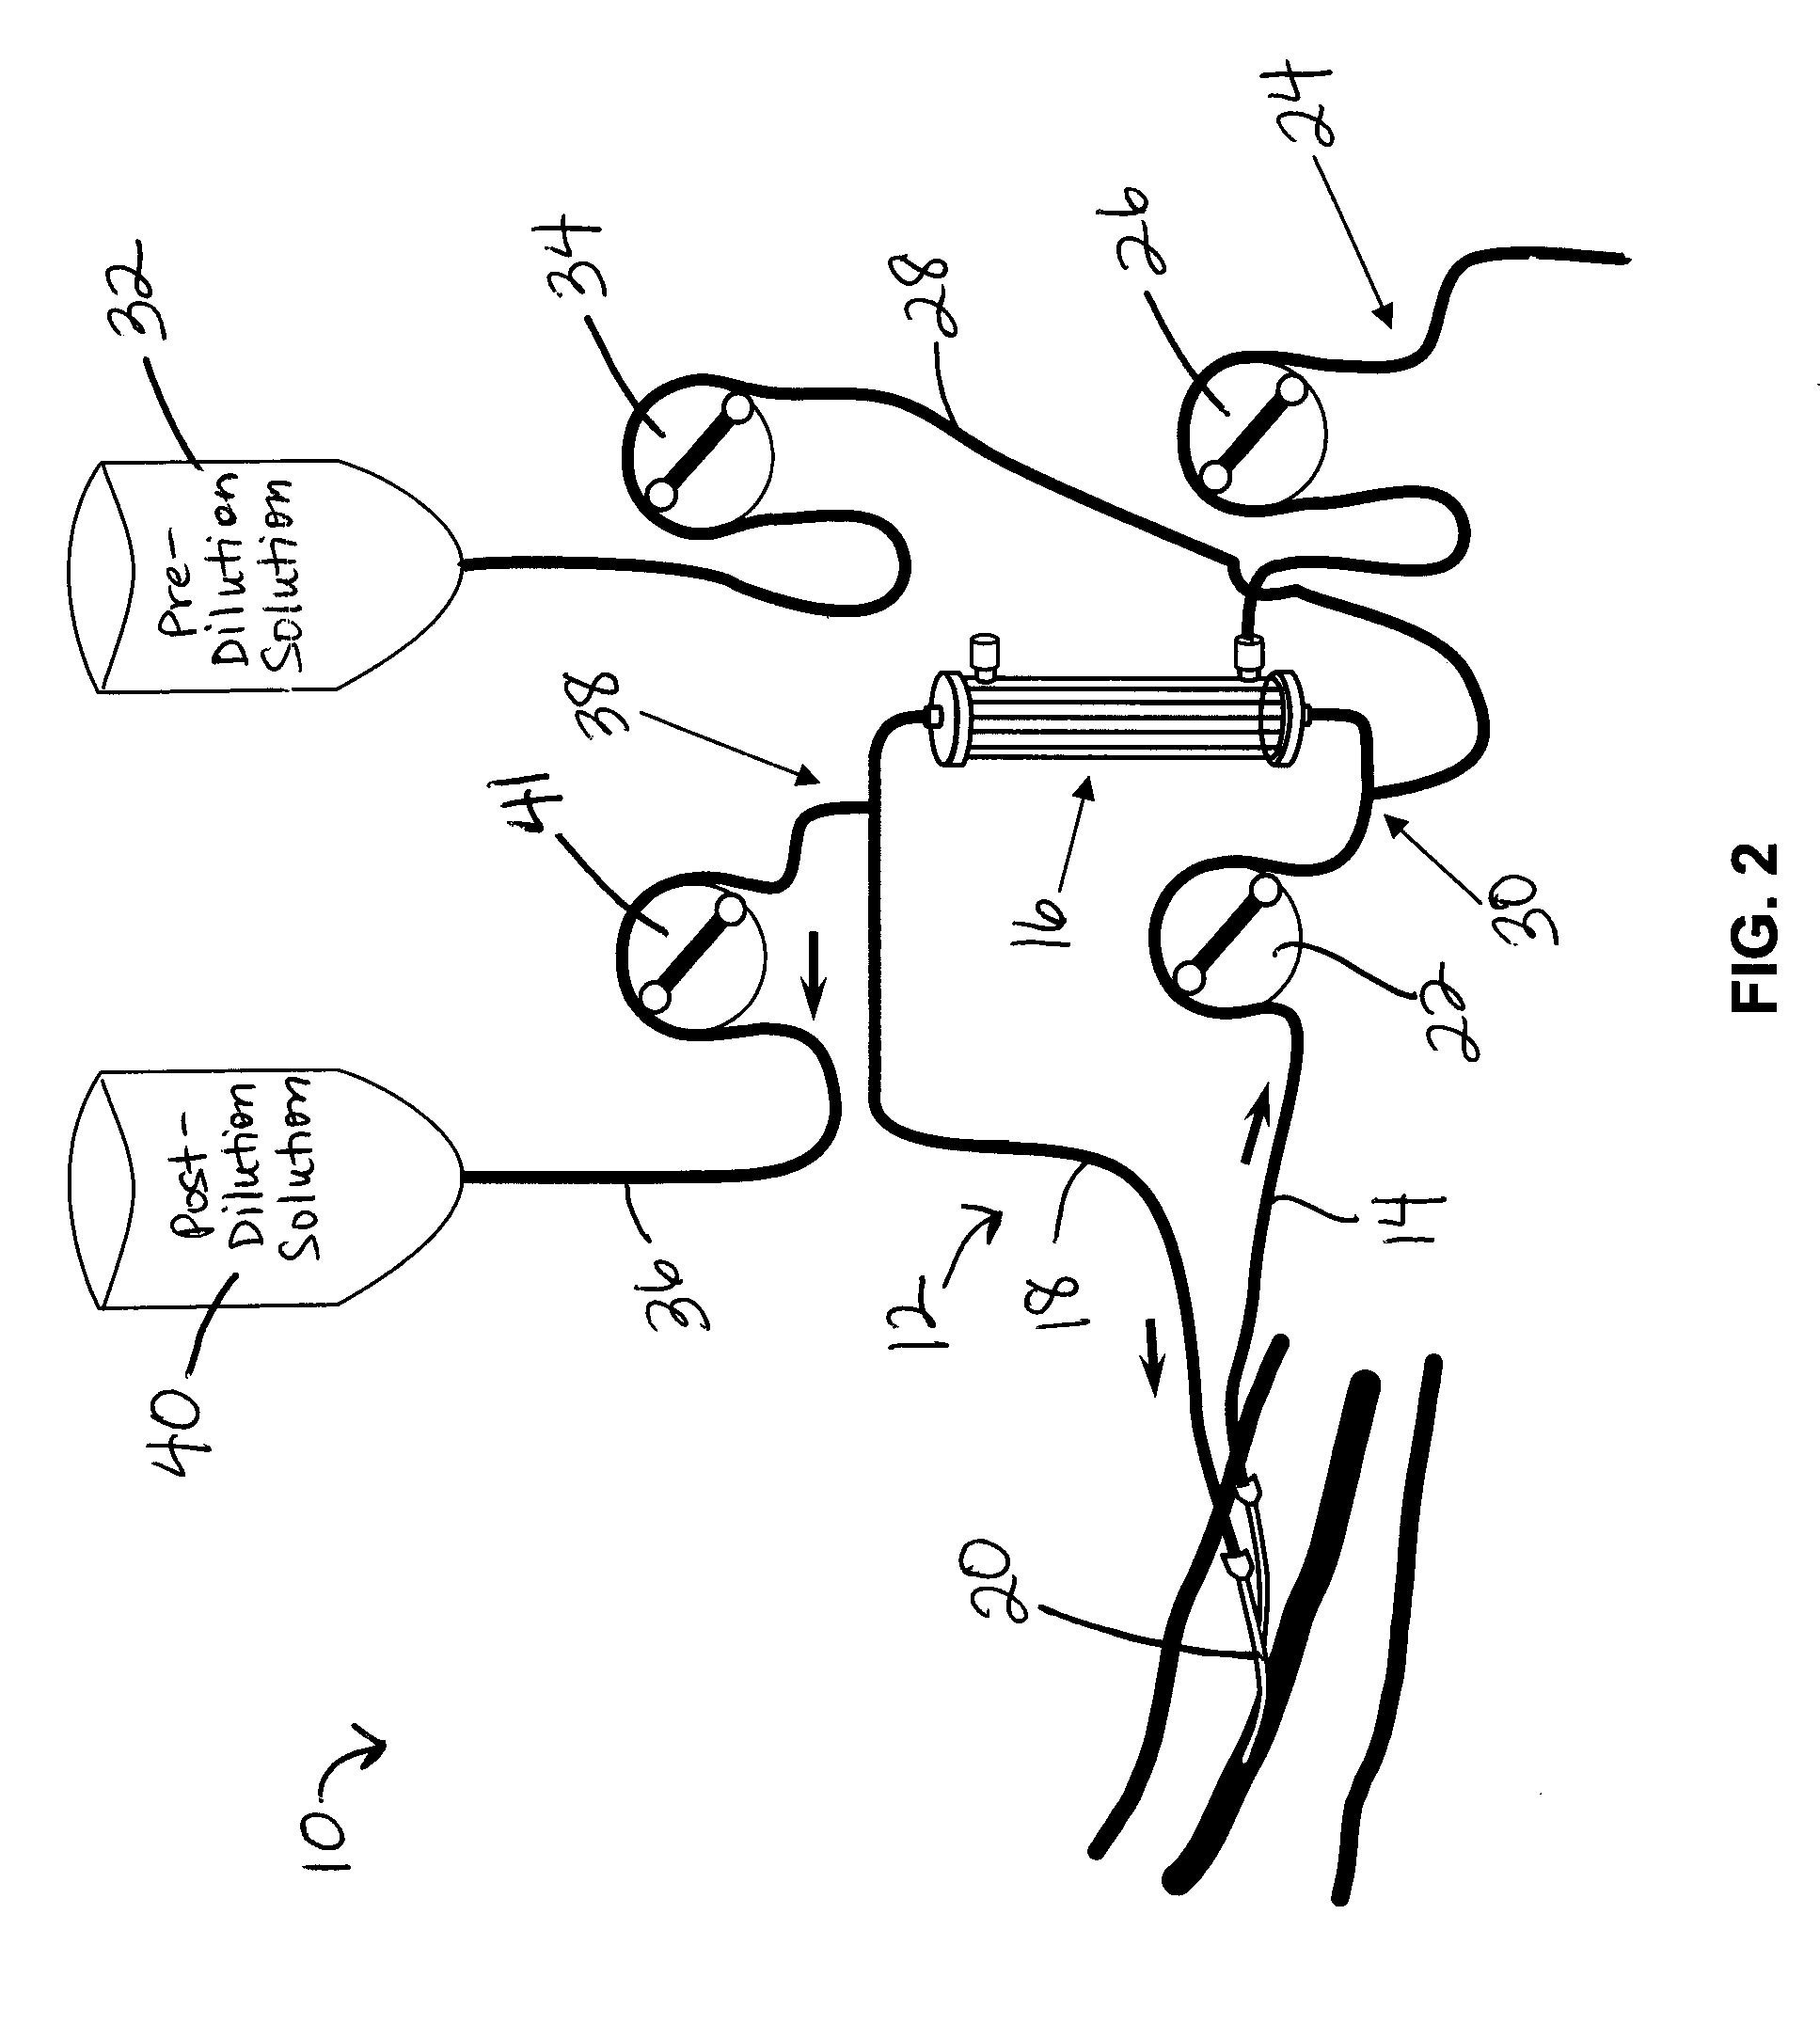 System and method for delivery of regional citrate anticoagulation to extracorporeal blood circuits